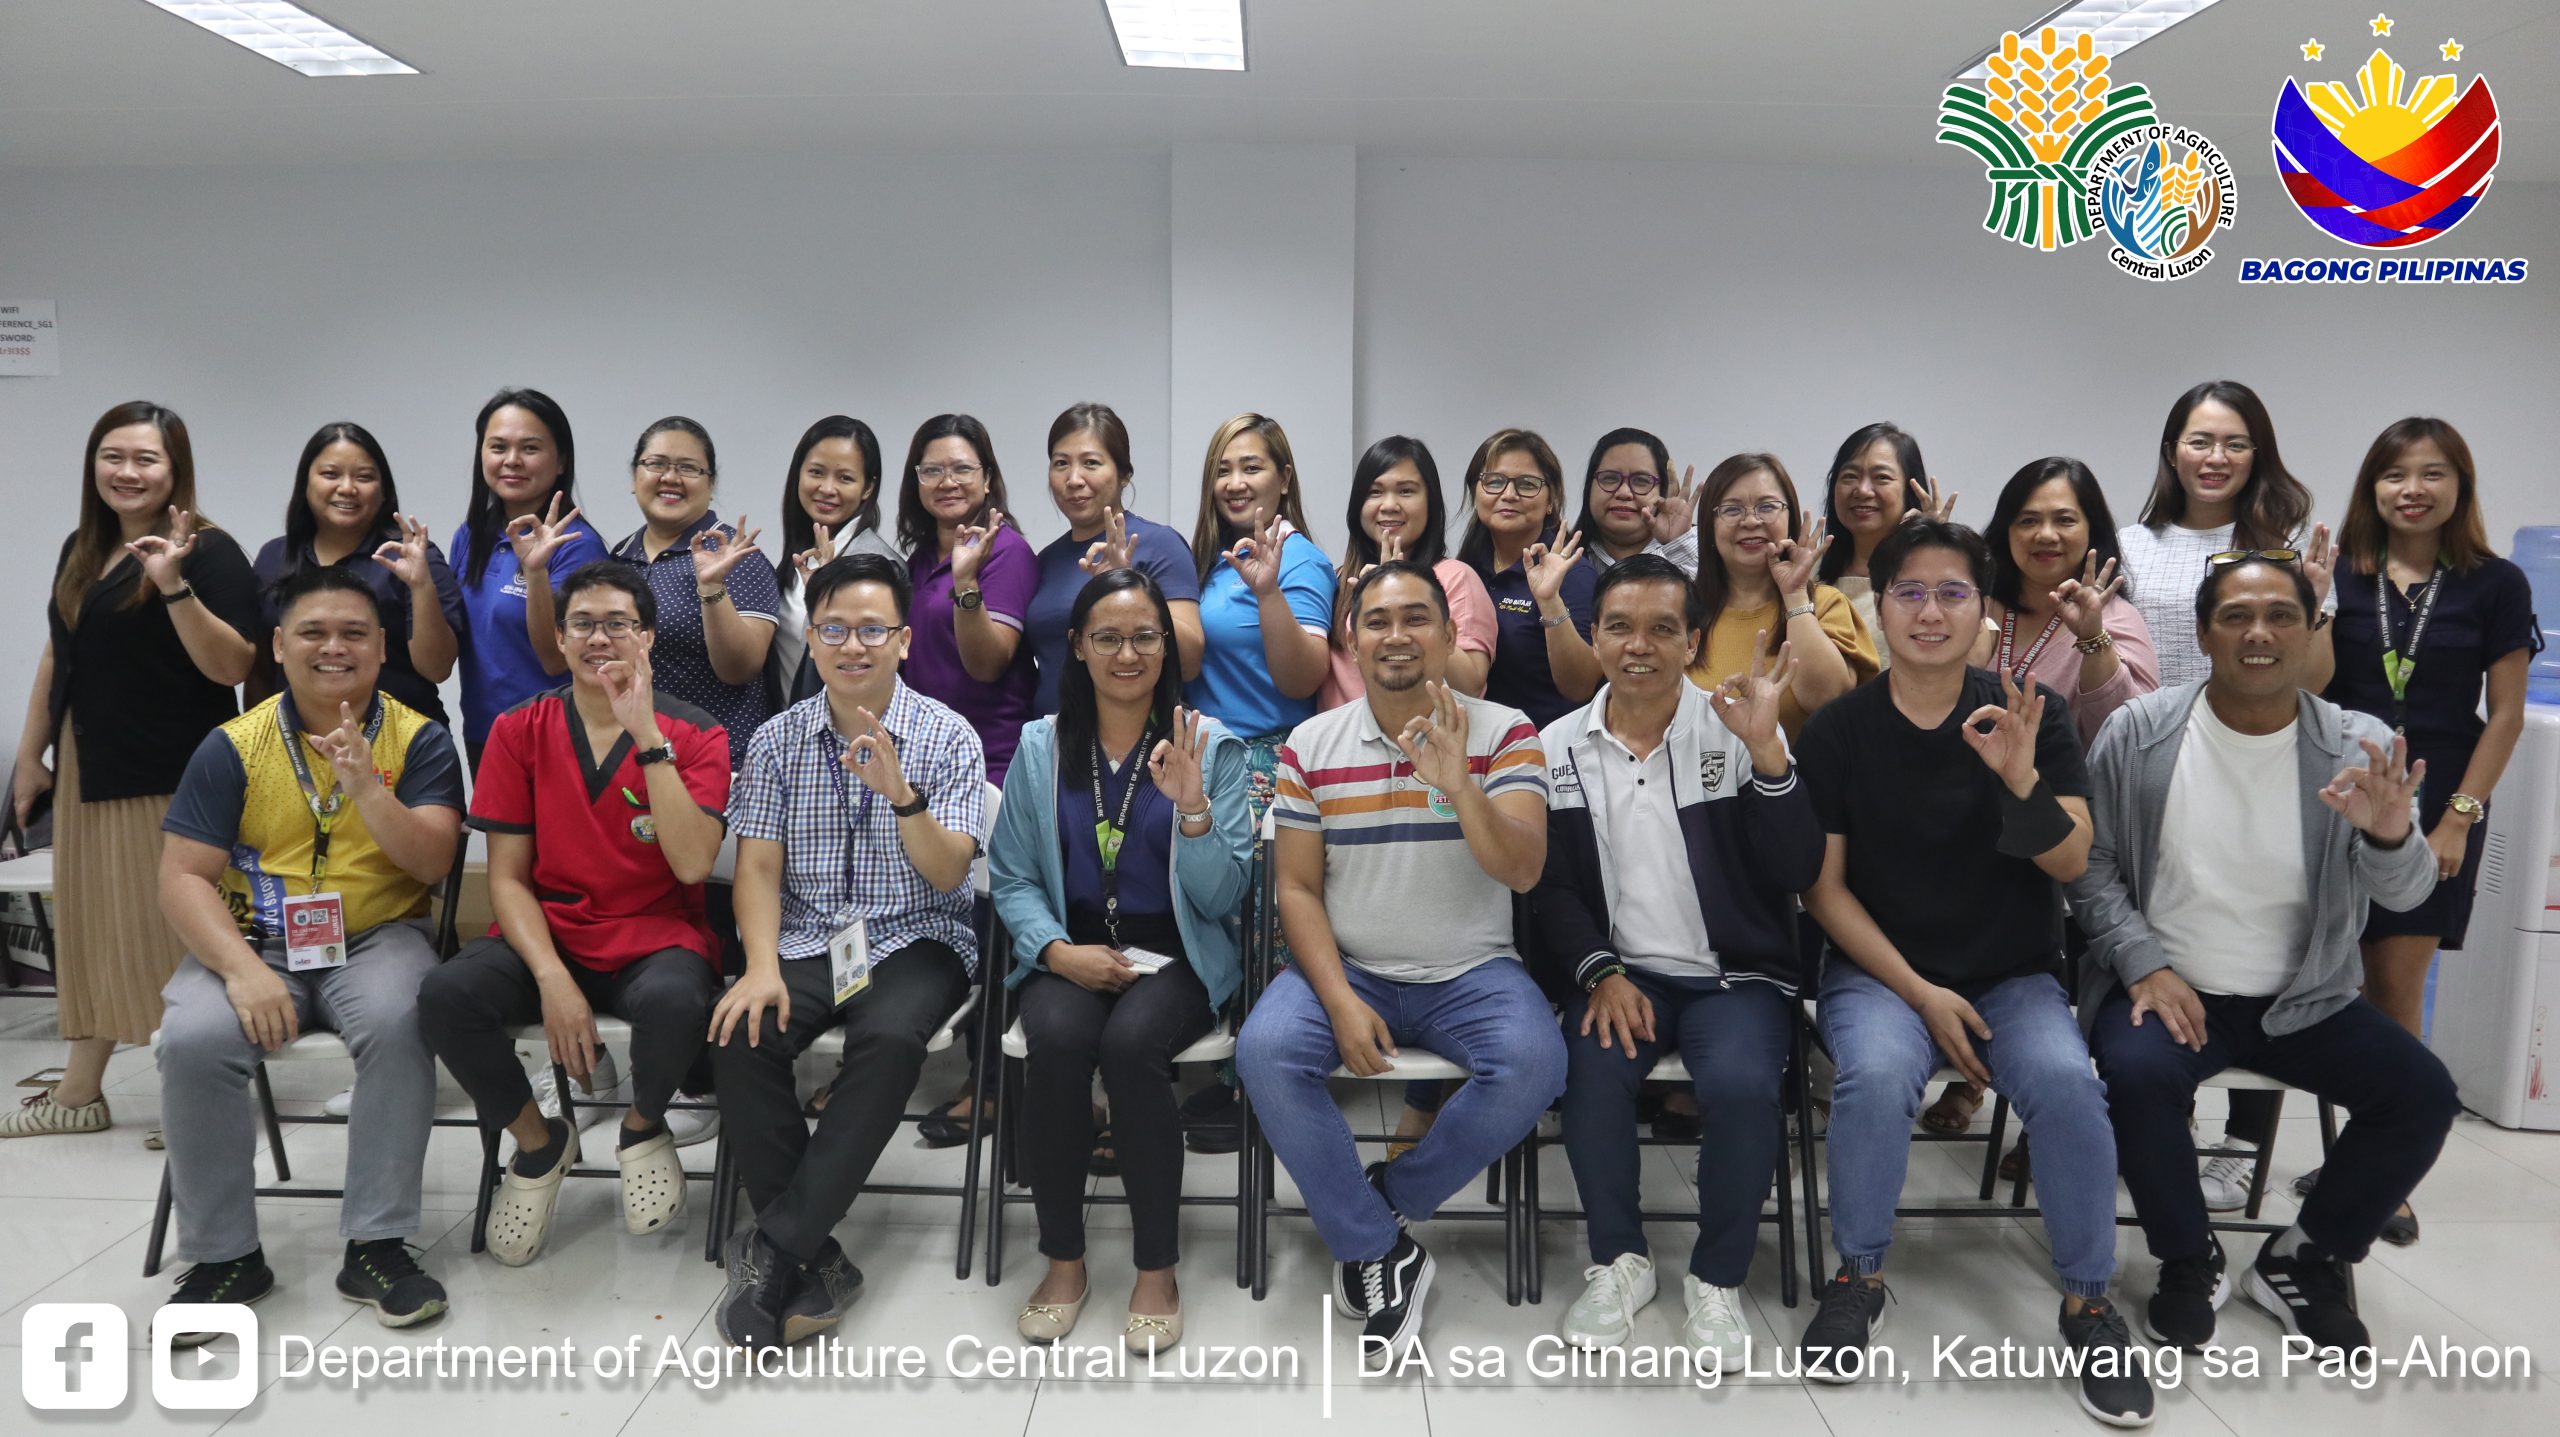 FY 2023 GULAYAN SA PAARALAN PROJECT 4TH QUARTER ASSESSMENT CUM FY 2024-2025 PLANNING WORKSHOP, ISINAGAWA